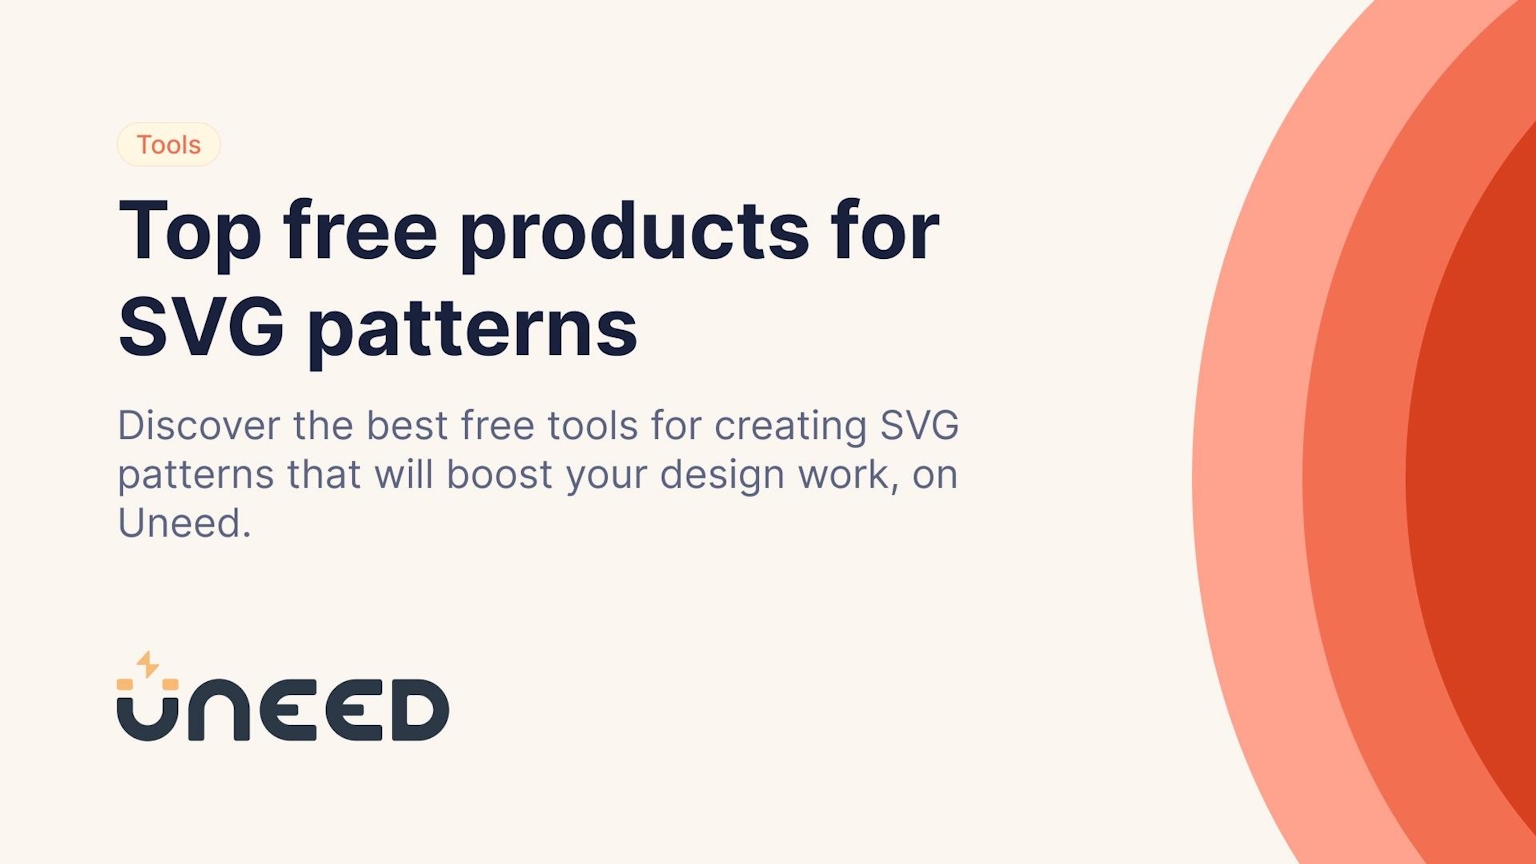 Top free products for SVG patterns